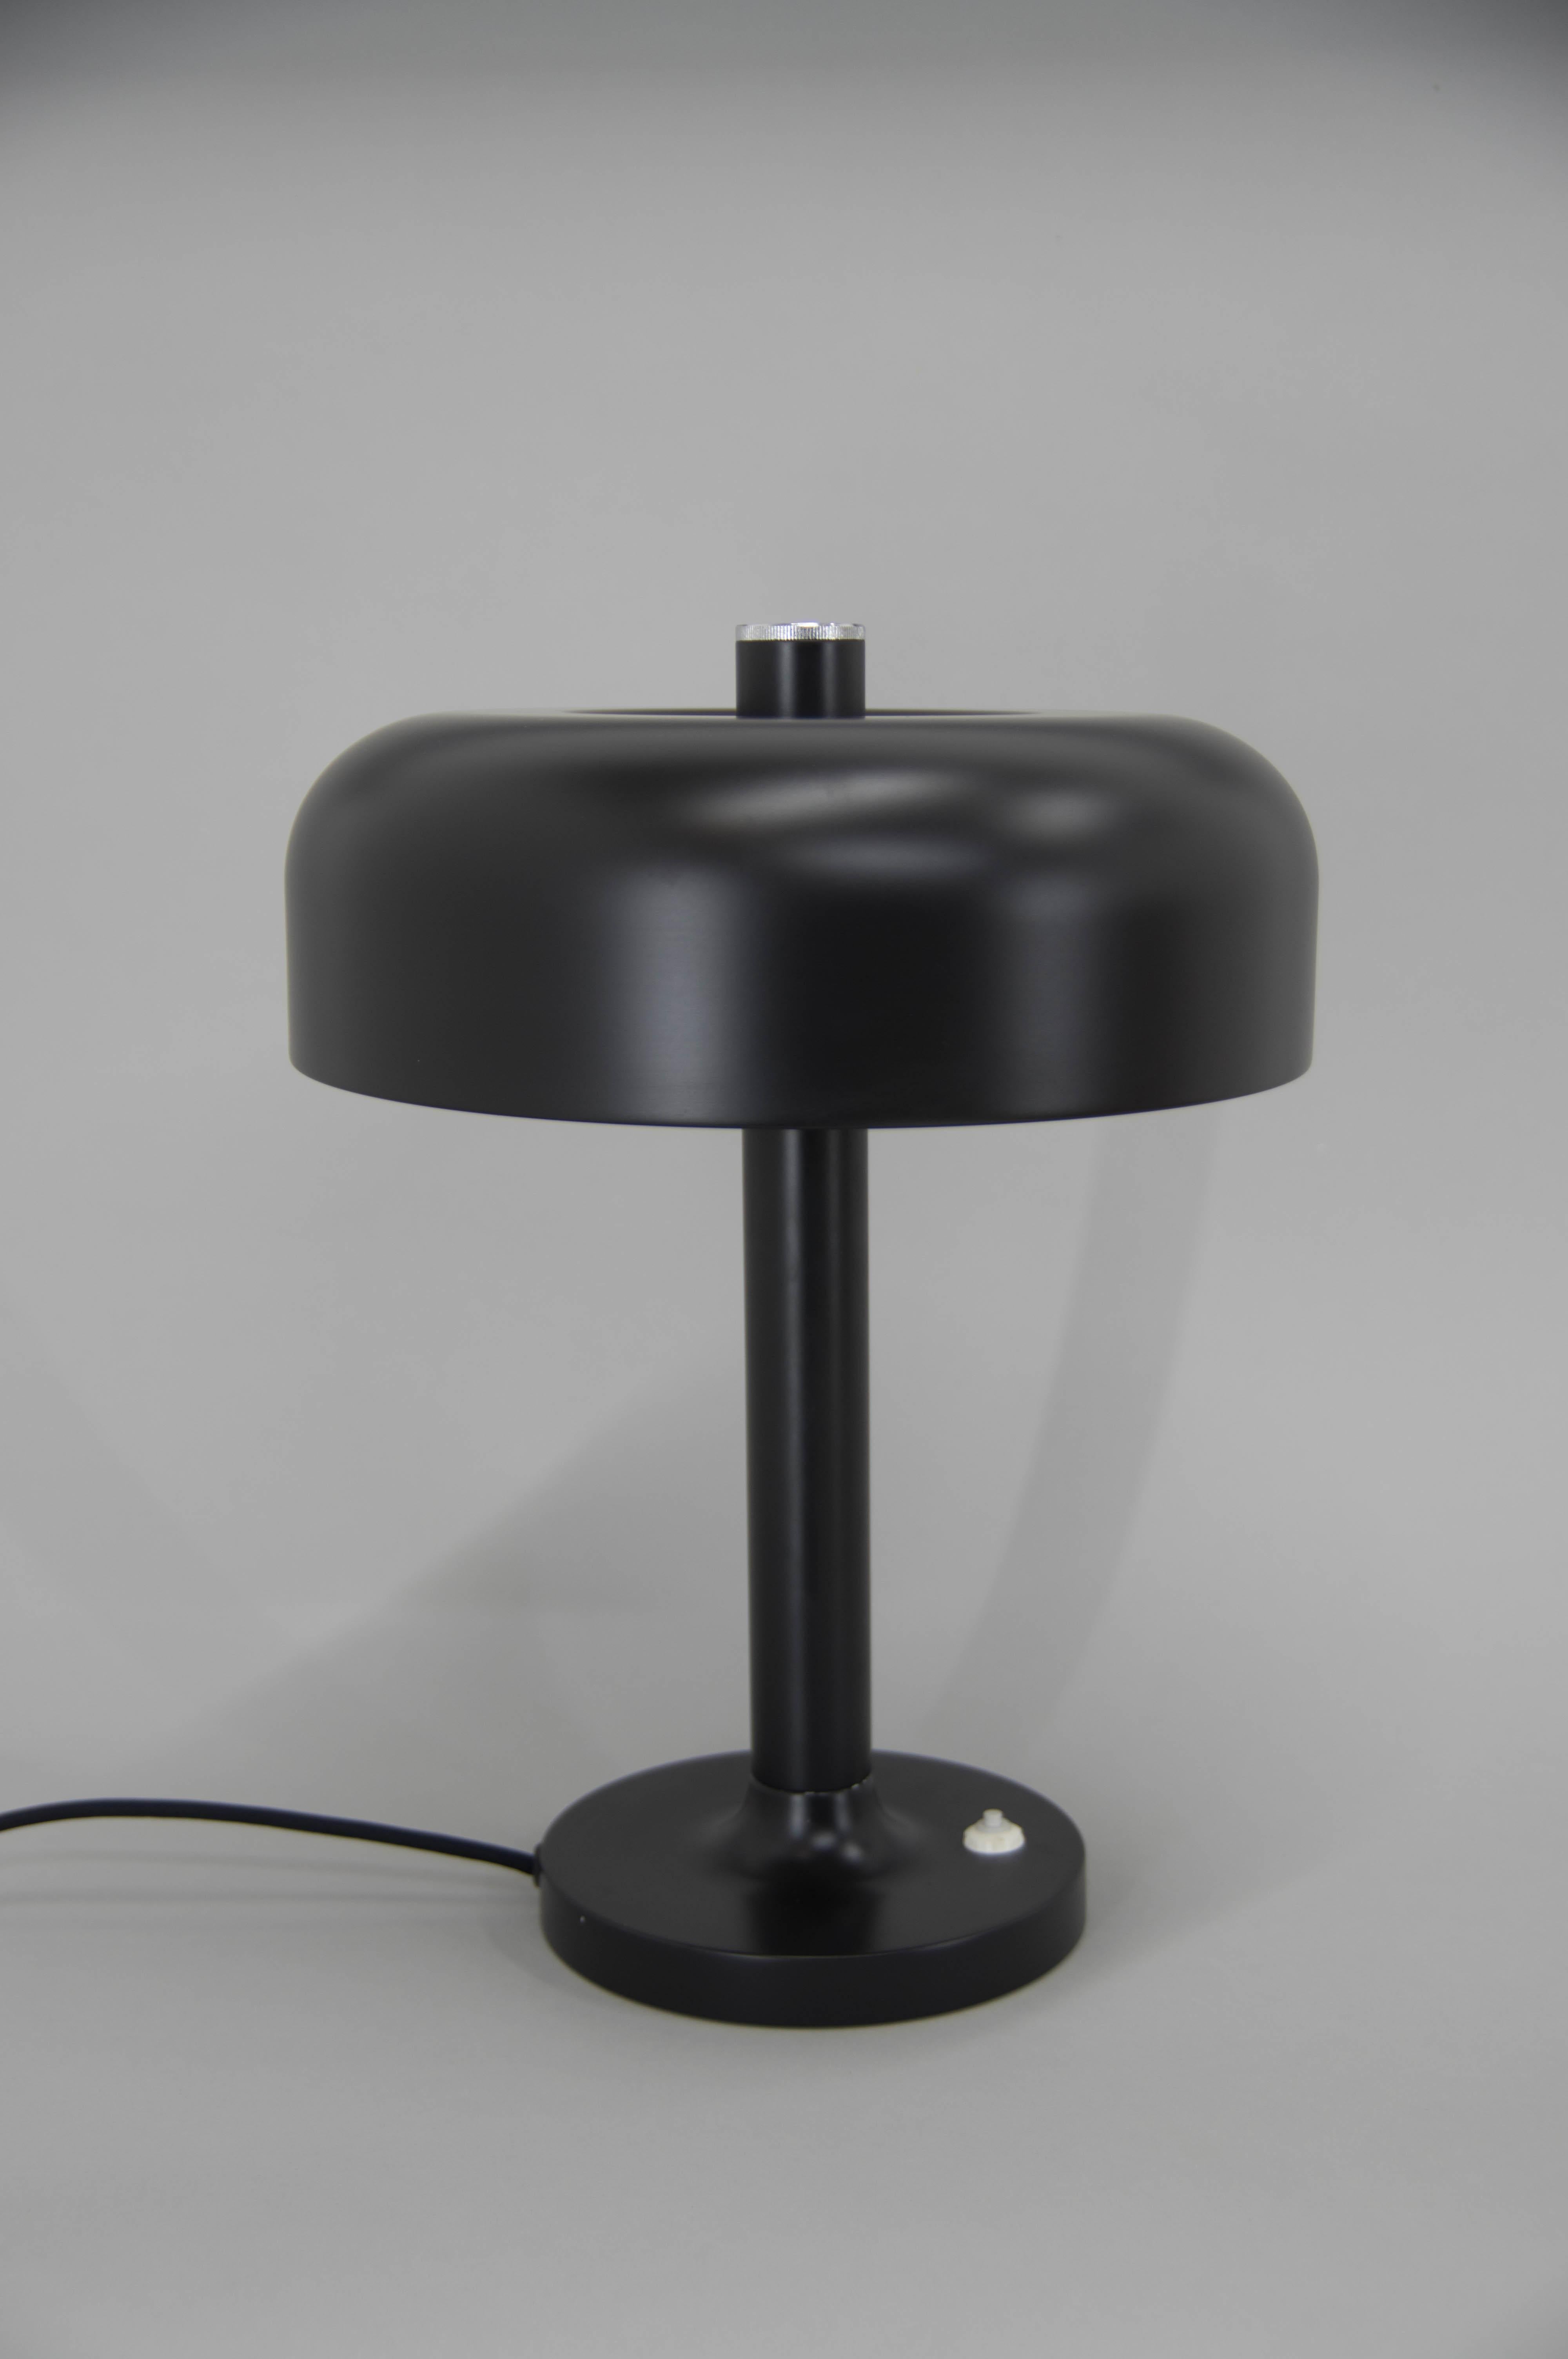 Big black table lamp.
New paint
Minor loses of color seen on photos.
2 x 40W, E25-E27 bulbs
US plug adapter included.